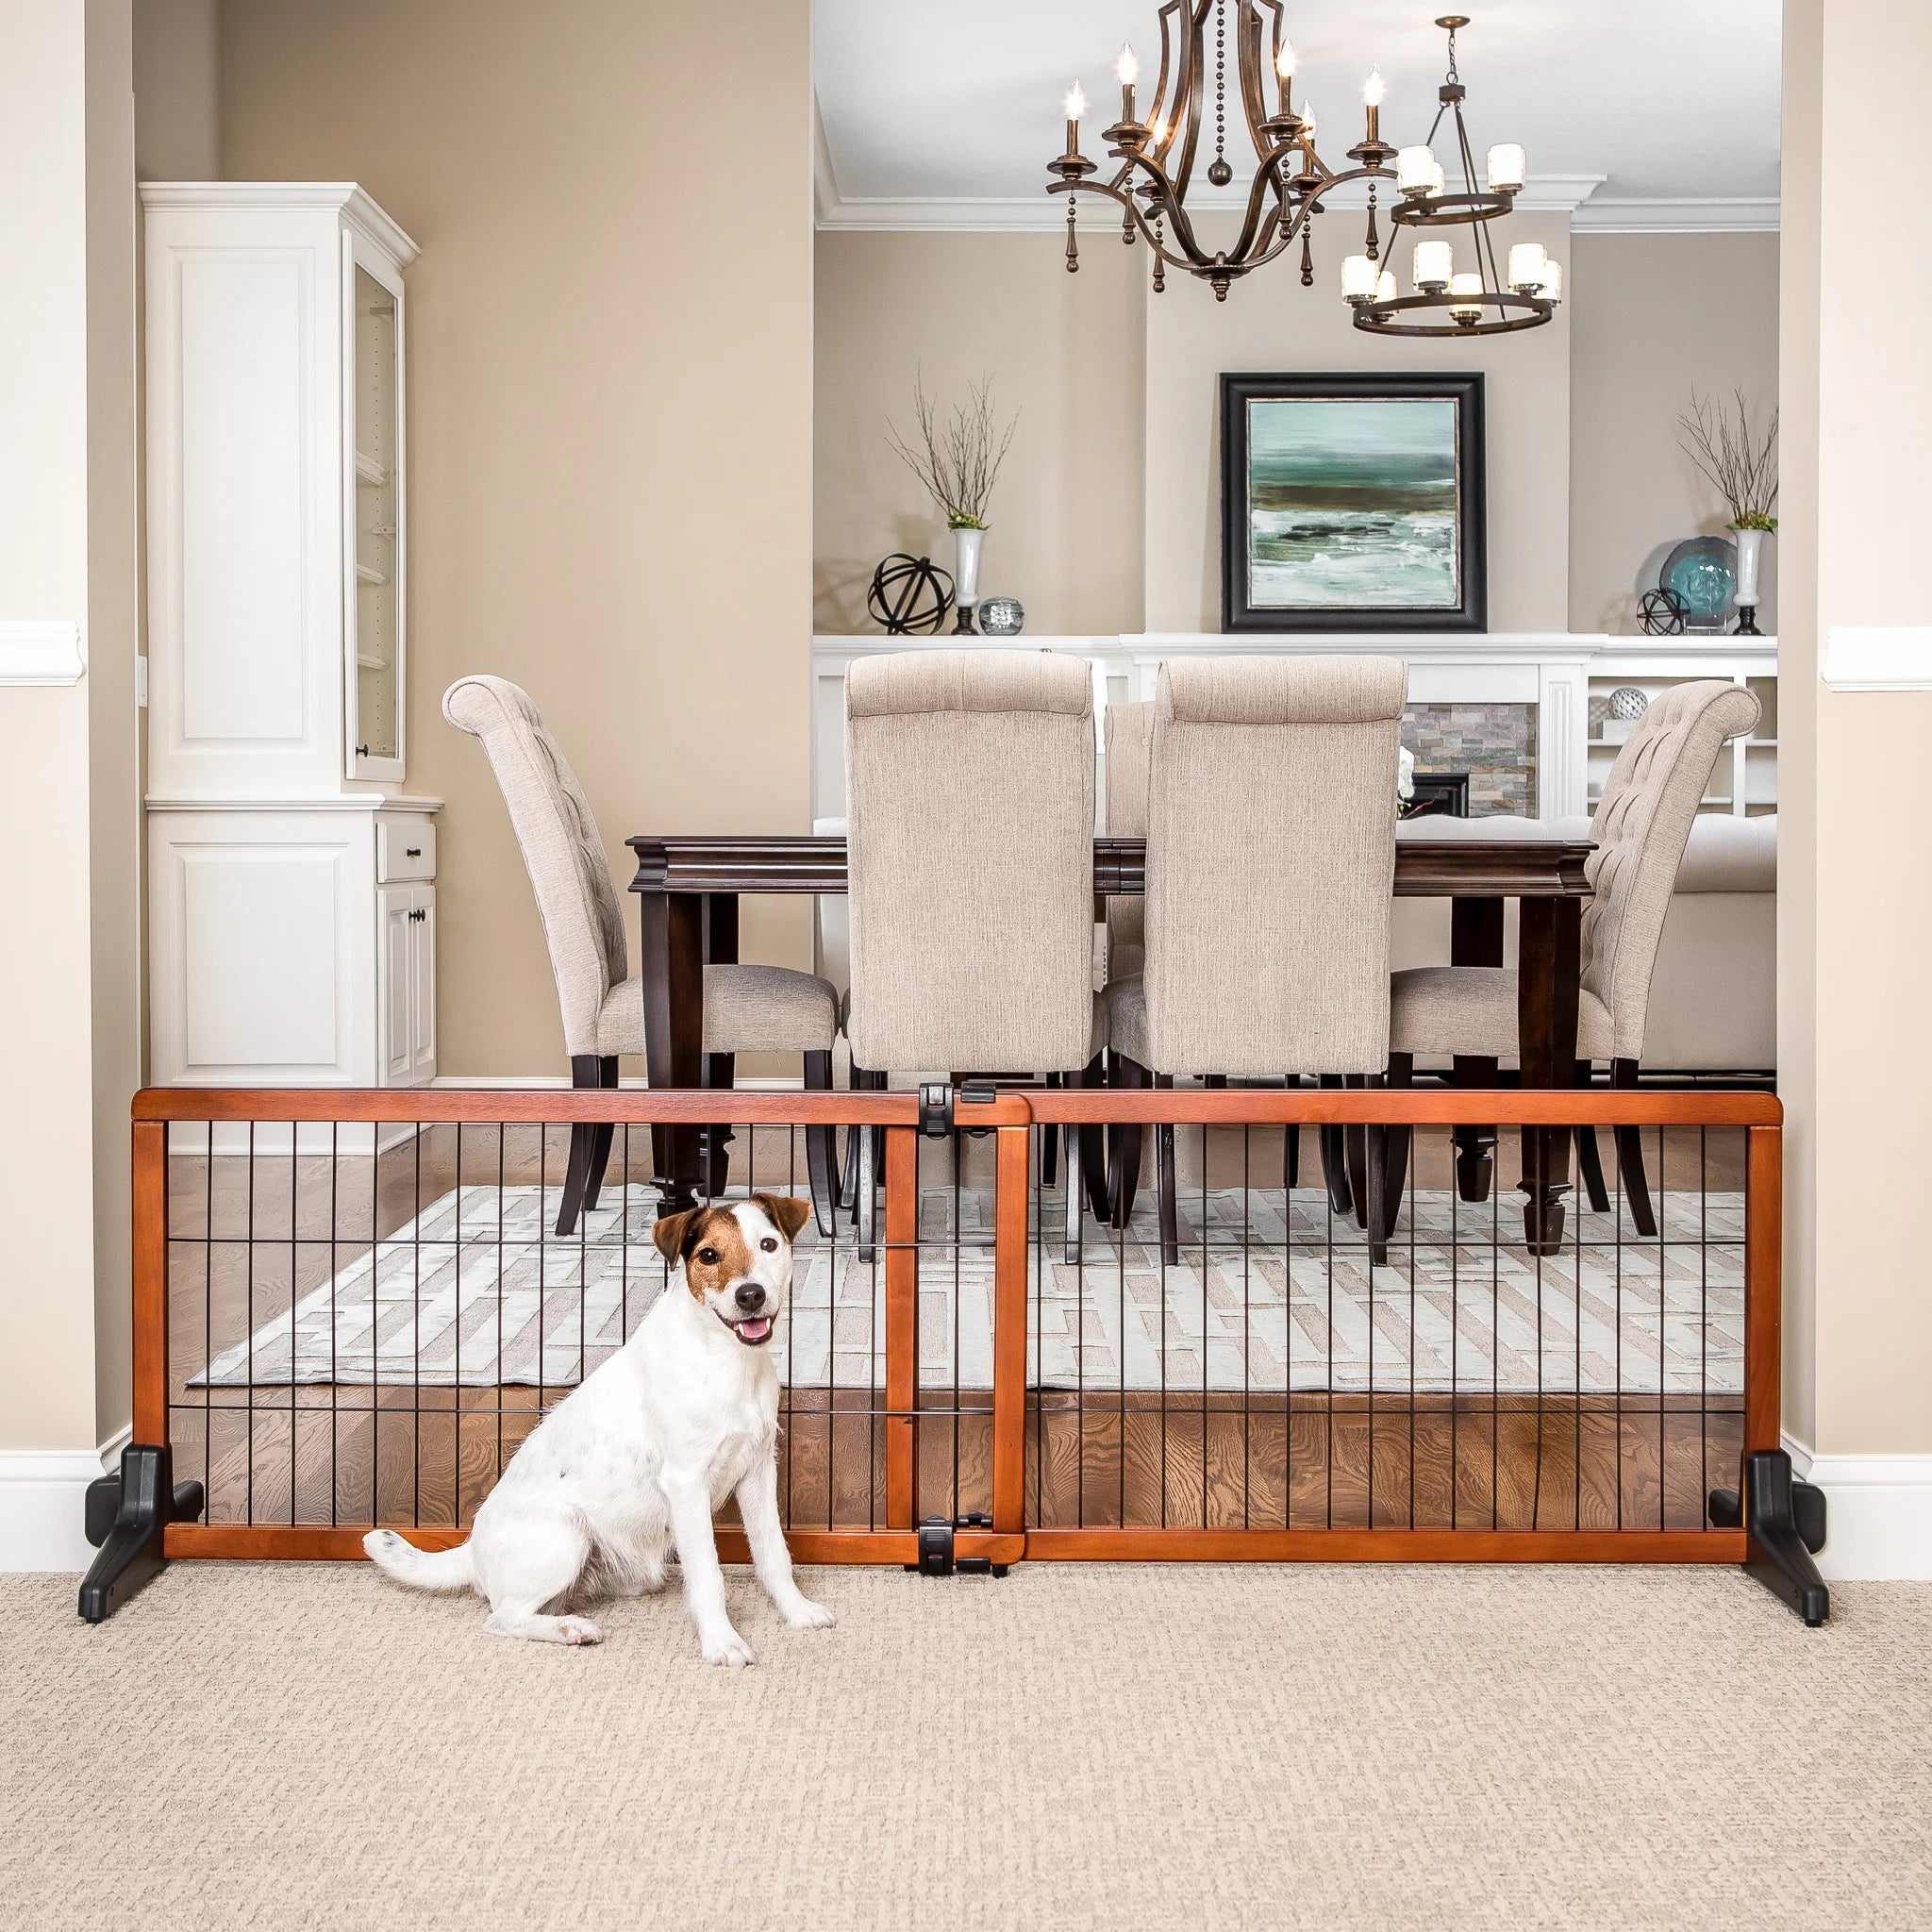 Dog standing in front of Design Paw Extra Wide Freestanding Pet Gate in dining room.